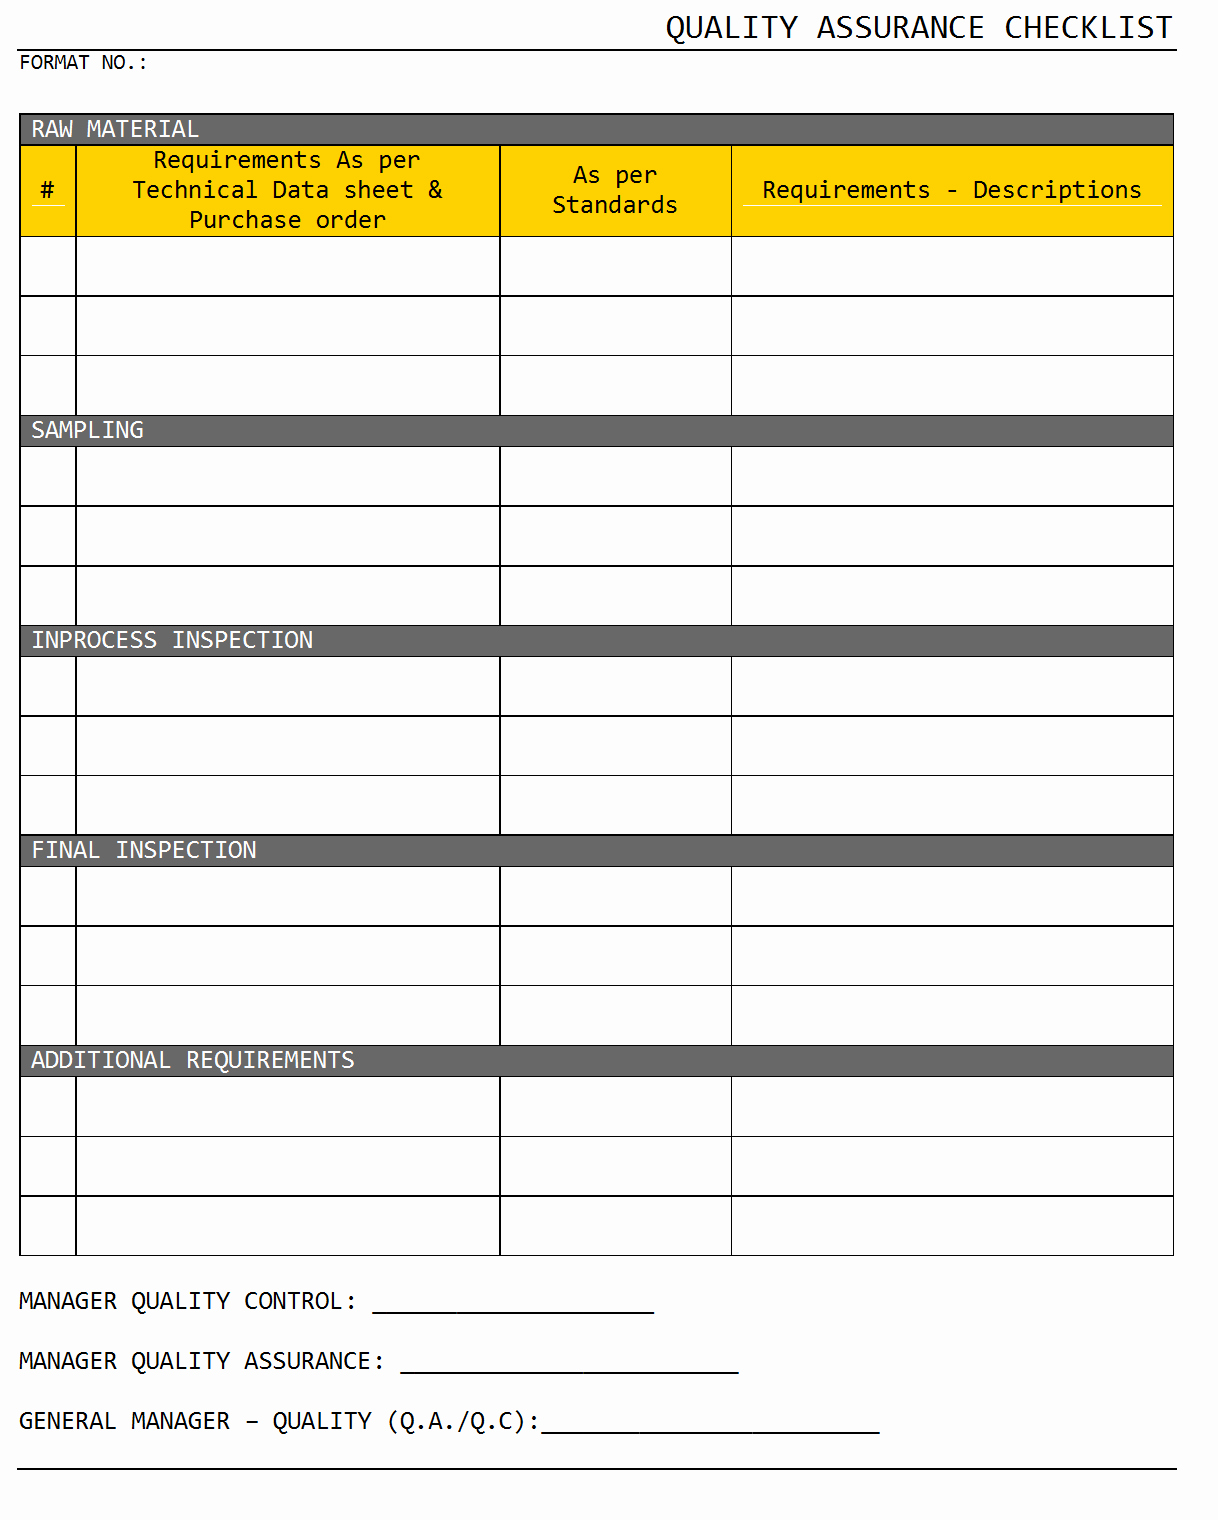 Quality Control Checklist Template Lovely Quality assurance Checklist